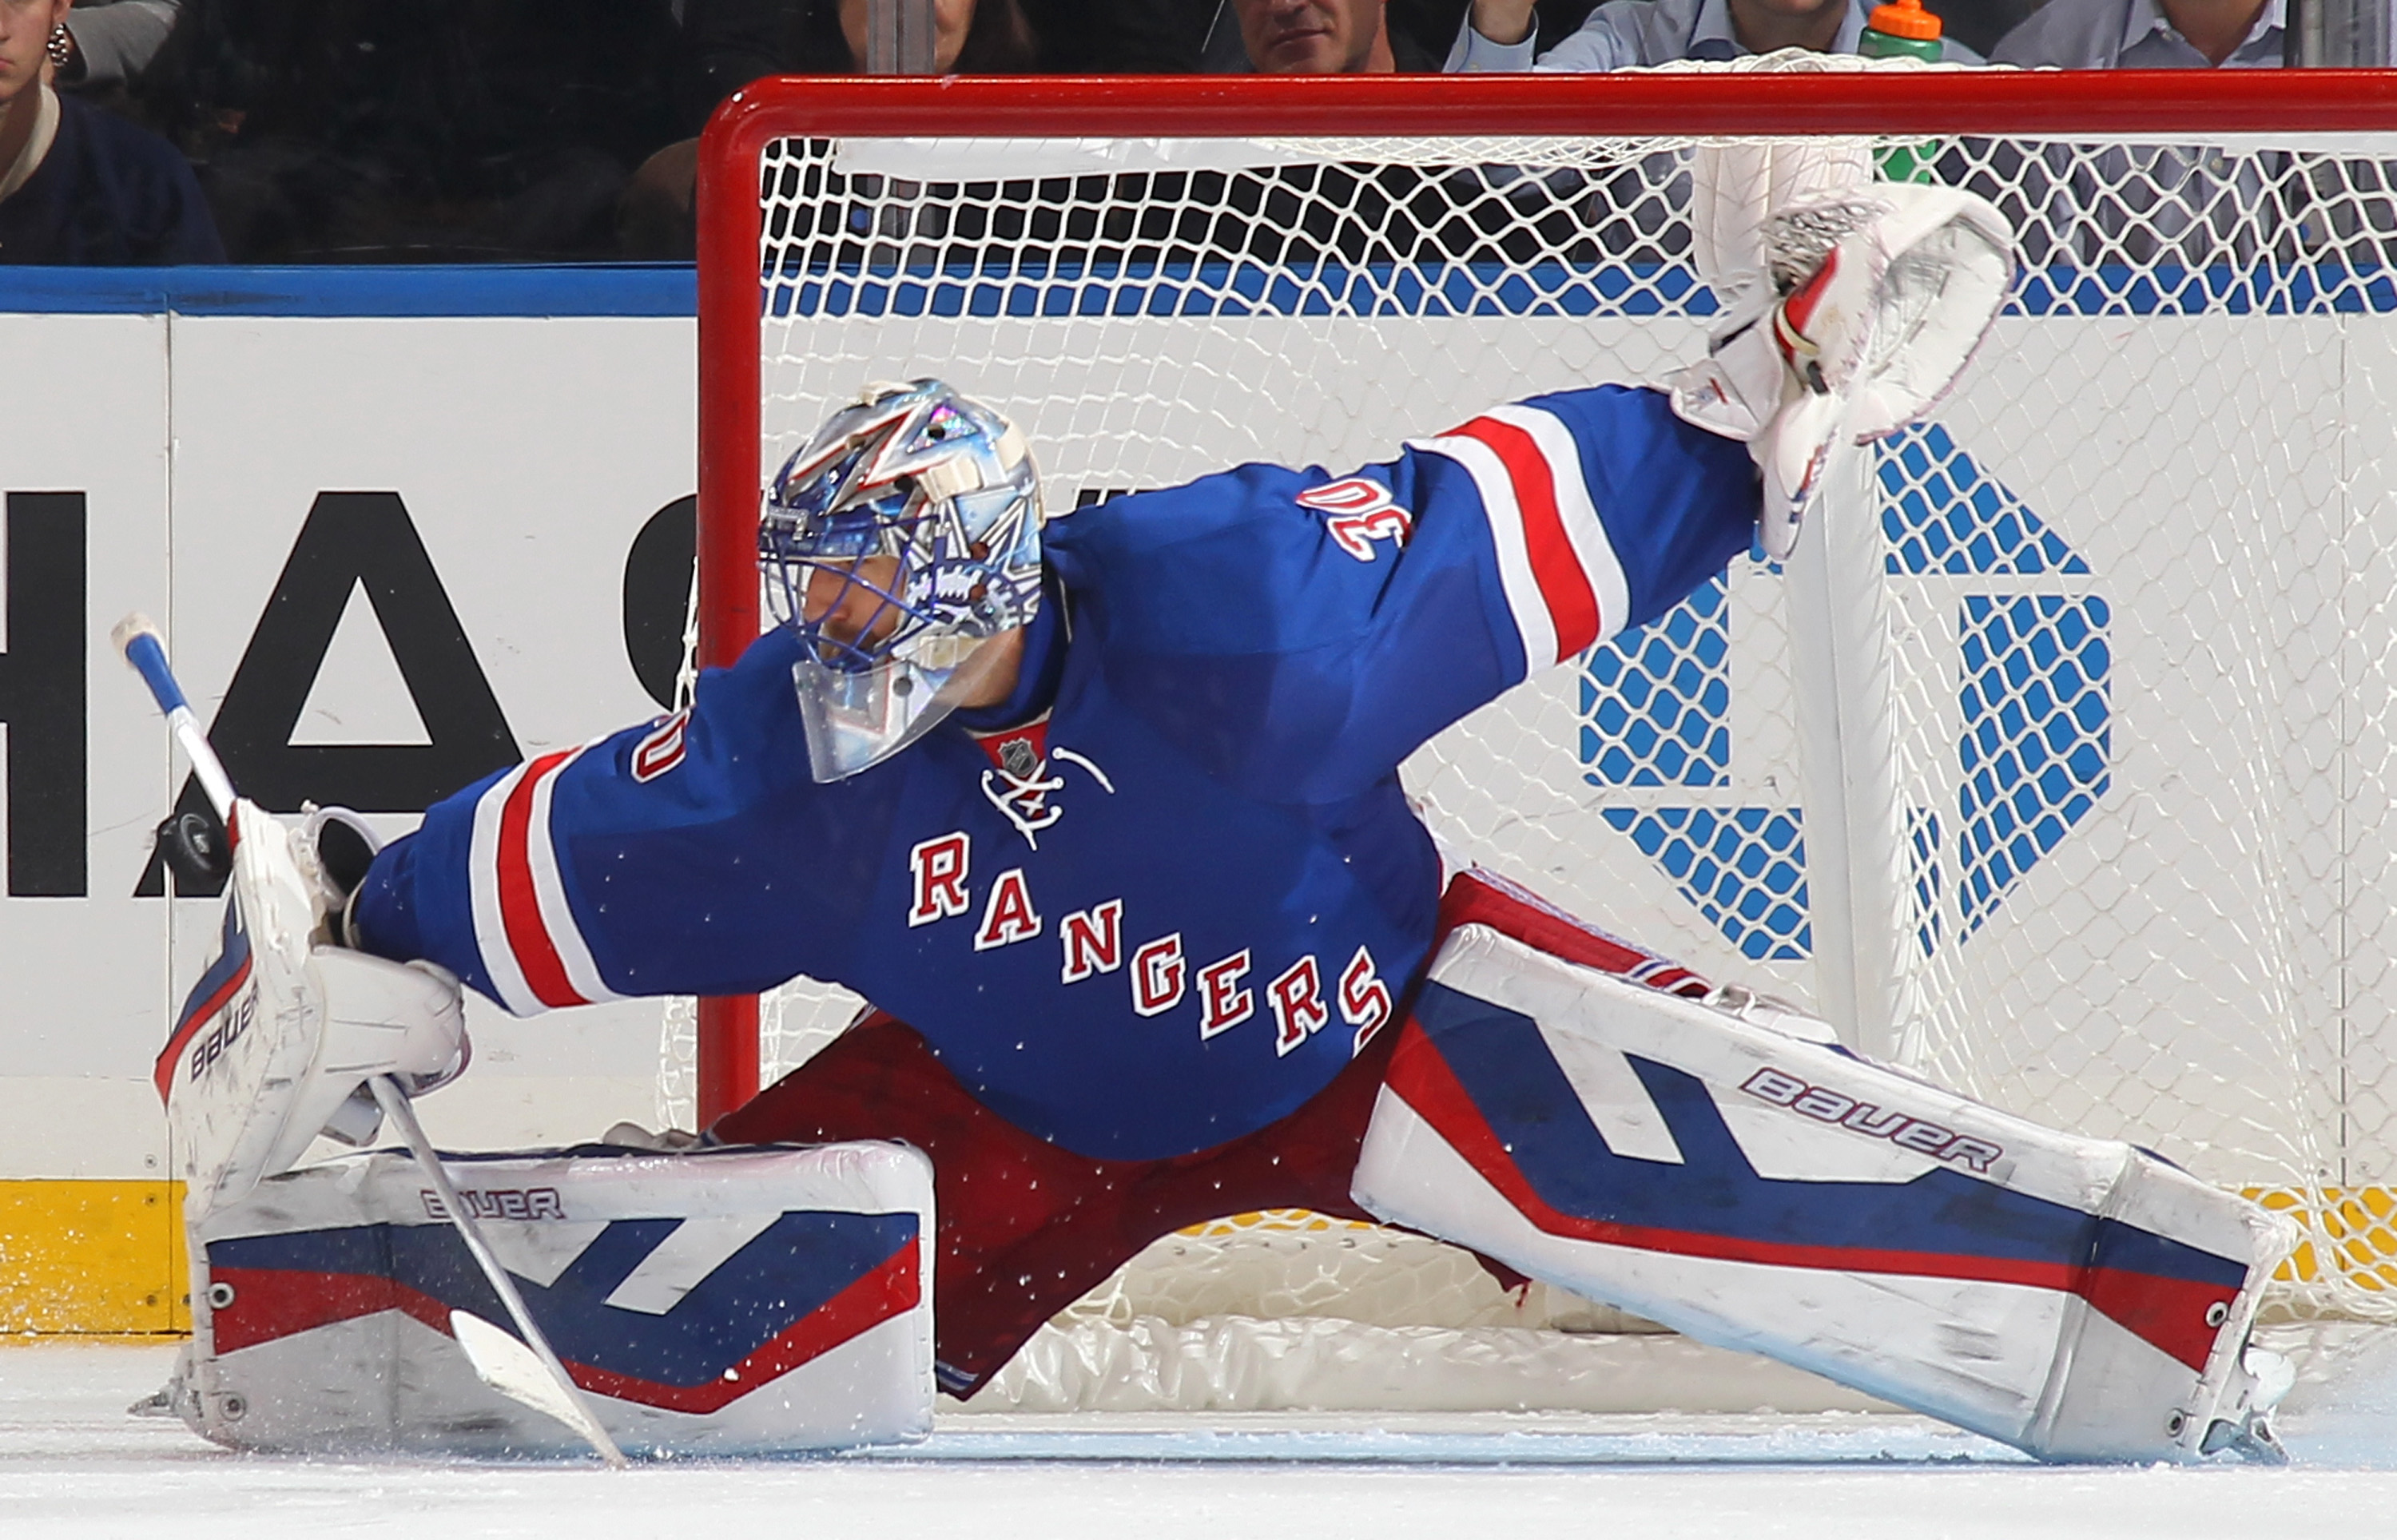 Henrik Lundqvist #30 of the New York Rangers makes a blocker save during the shootout against the Carolina Hurricanes at Madison Square Garden on October 16, 2014 in New York City. (Jared Silber&mdash;NHLI via Getty Images)